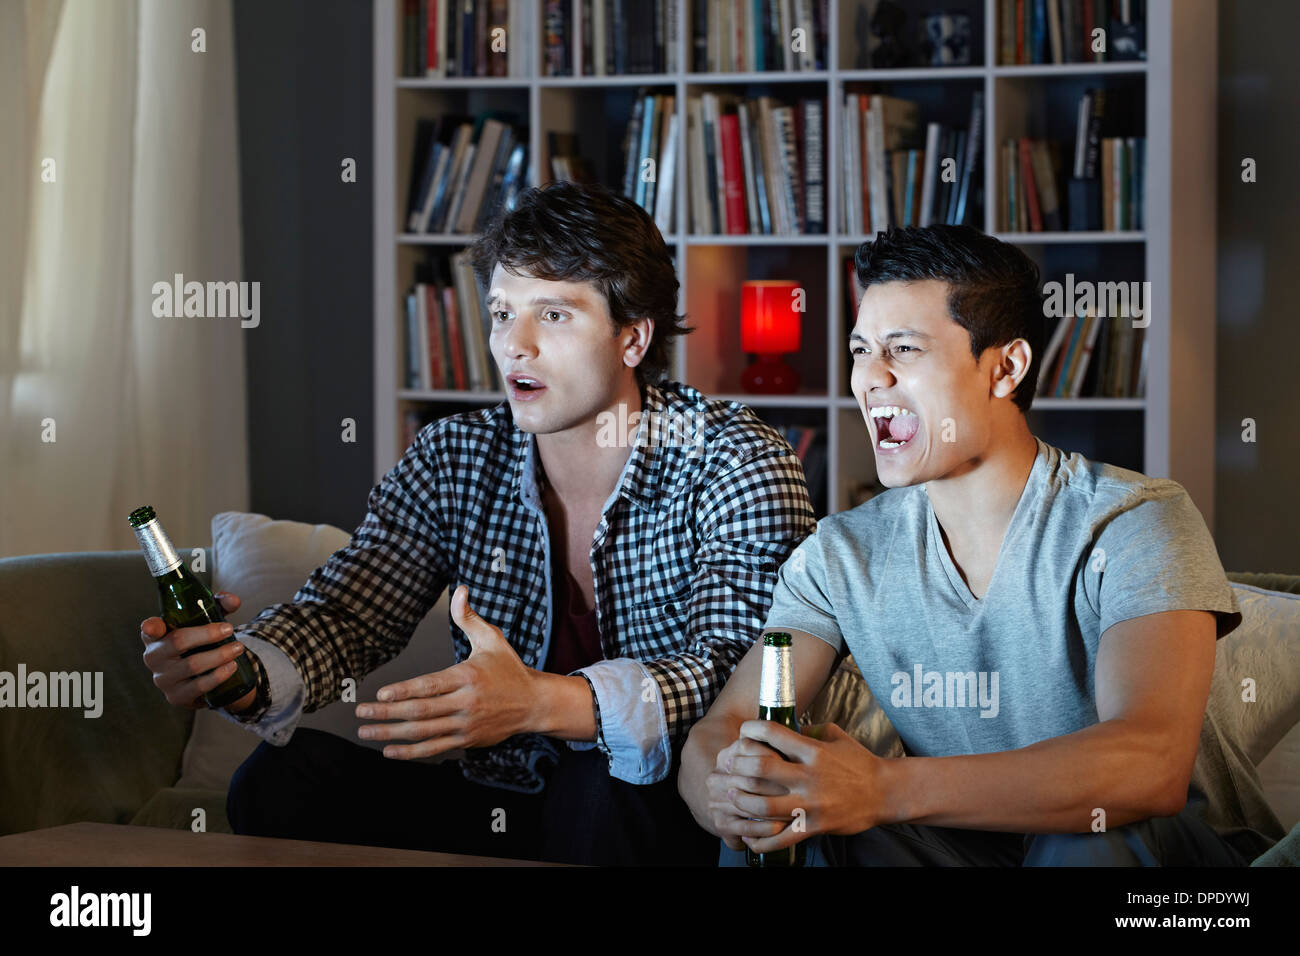 Young men shouting at tv, holding beer bottles Stock Photo